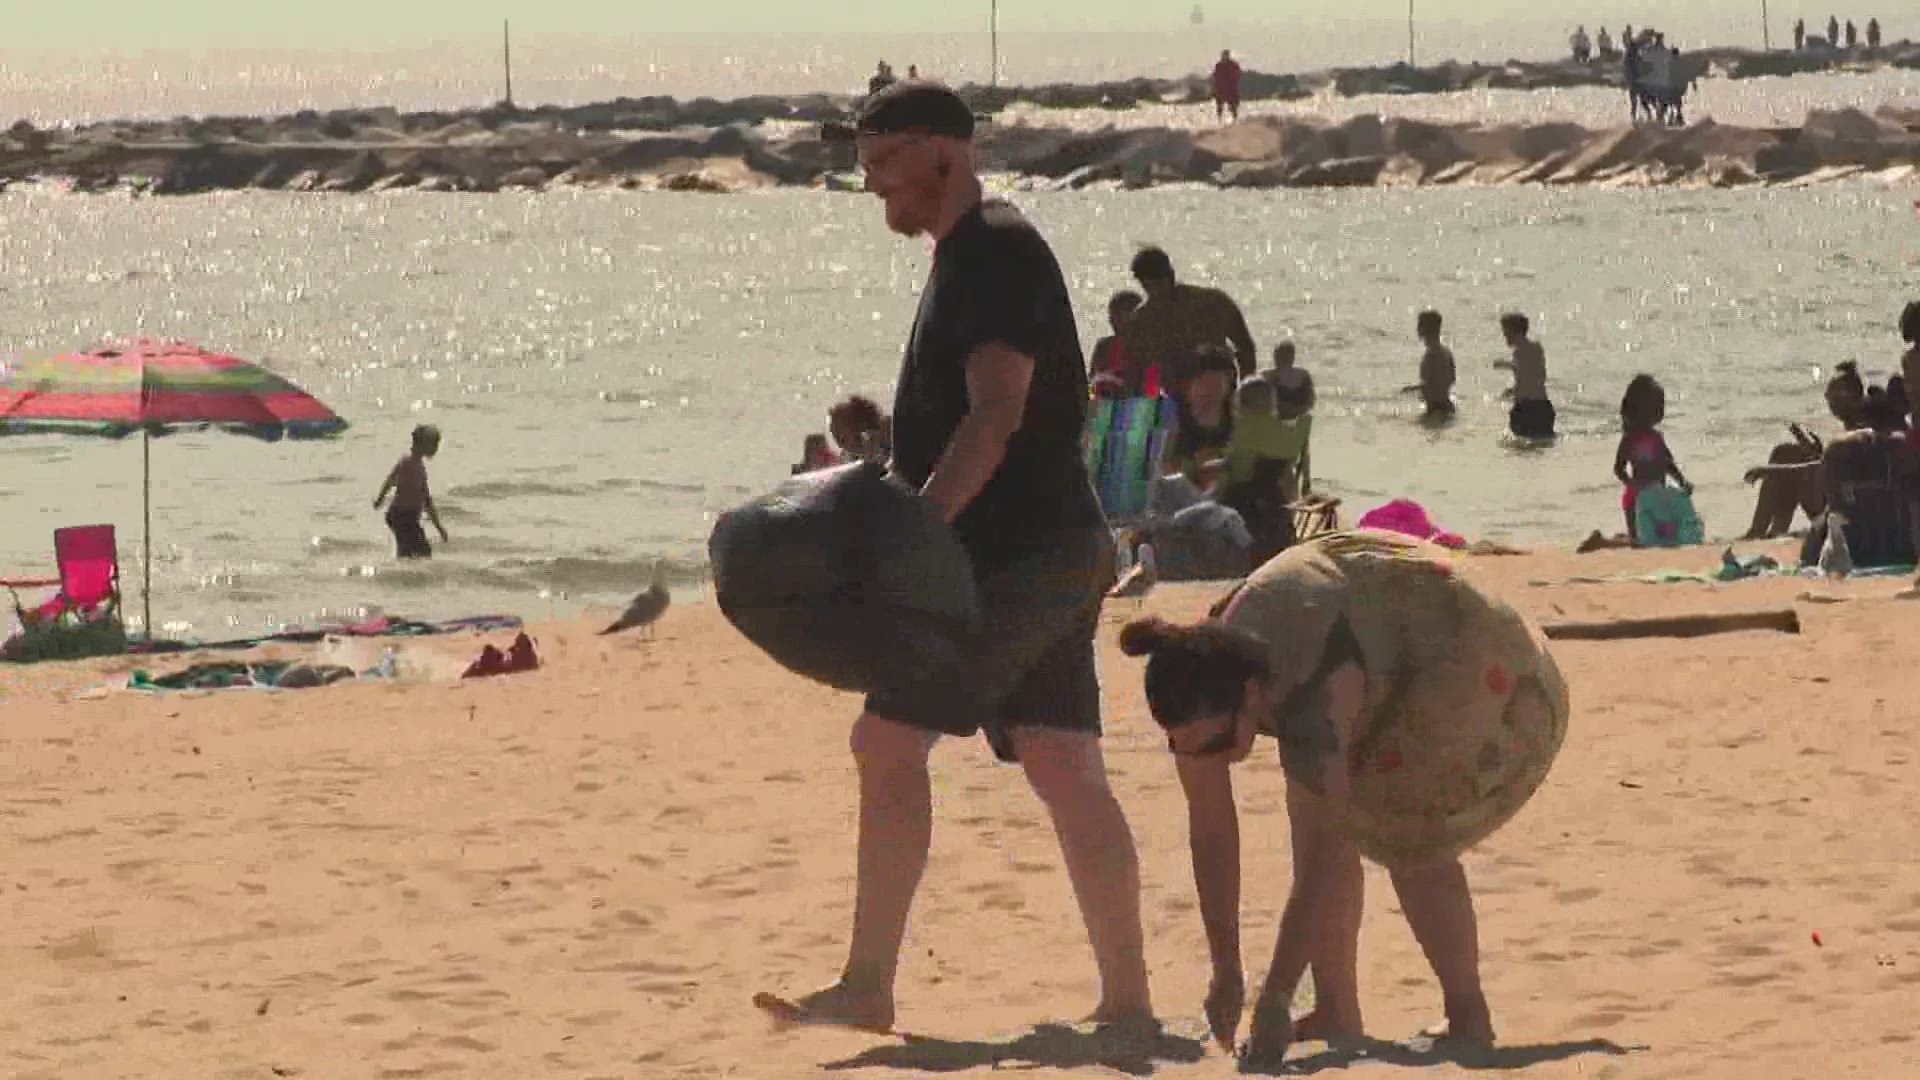 Organizers said they’ve been finding single-use masks littered across the beach.